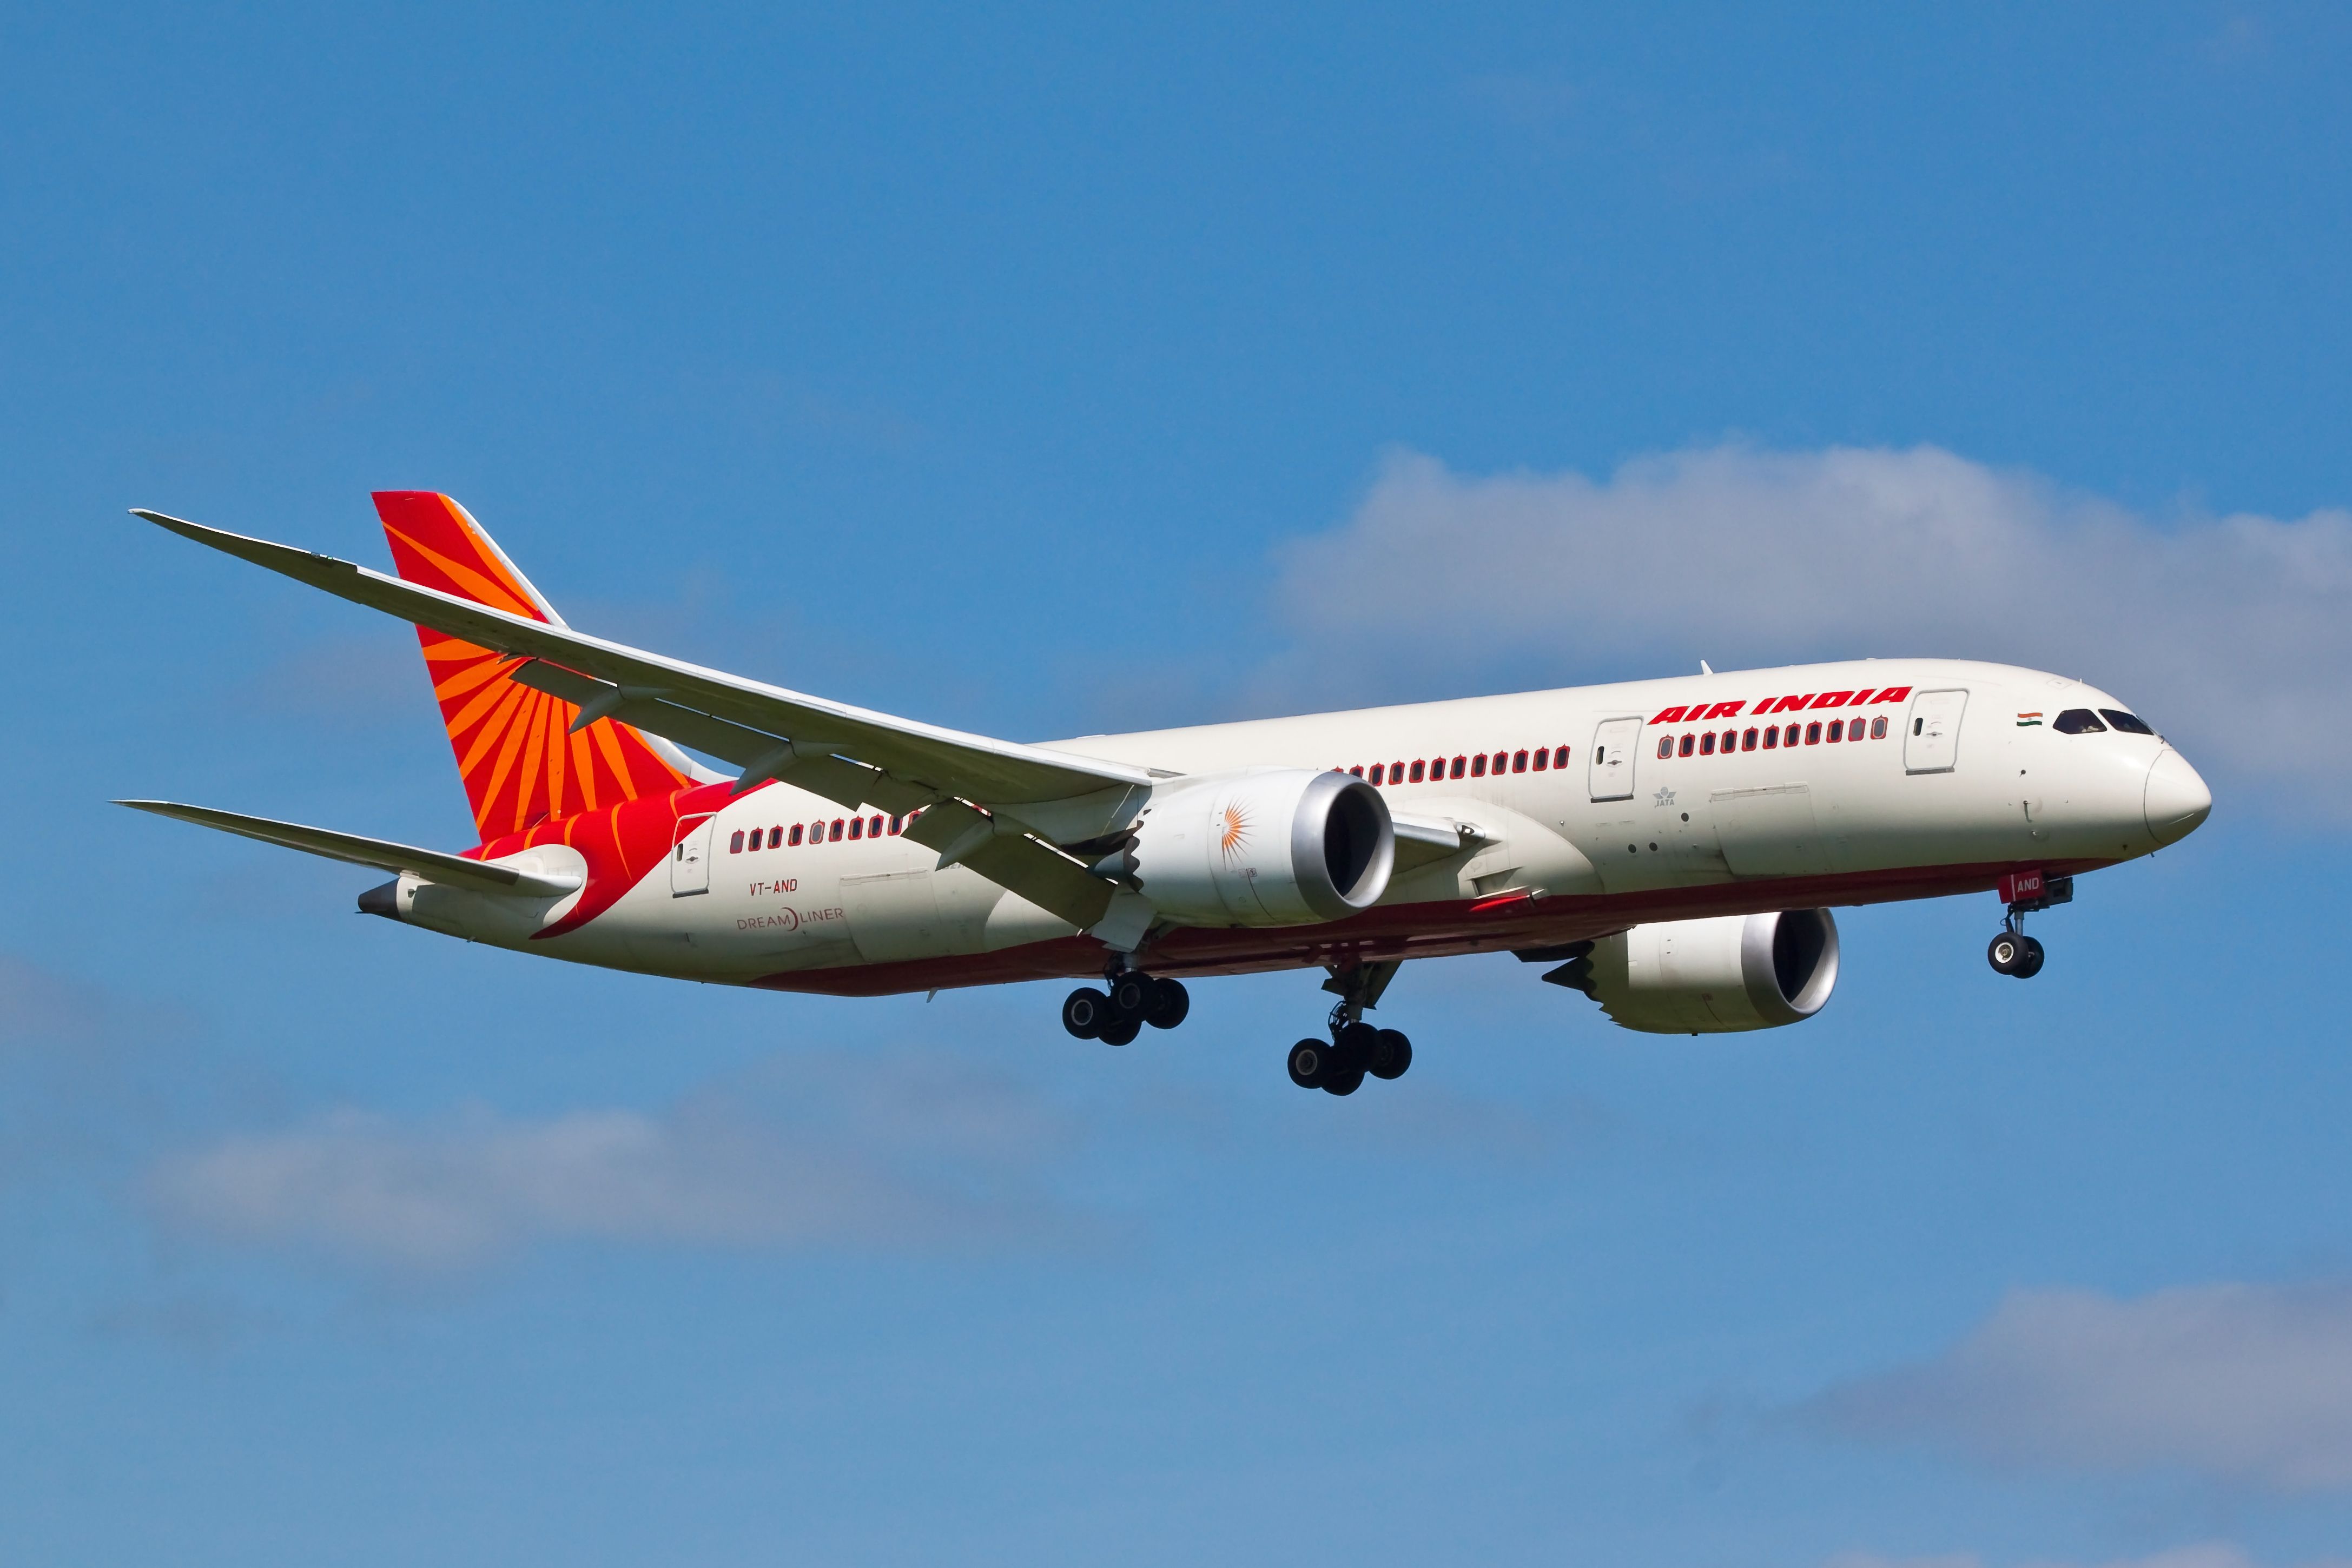 Air India Provides 2-Yr Ban To Passenger Who Assaulted Flight Attendants On Boeing 787